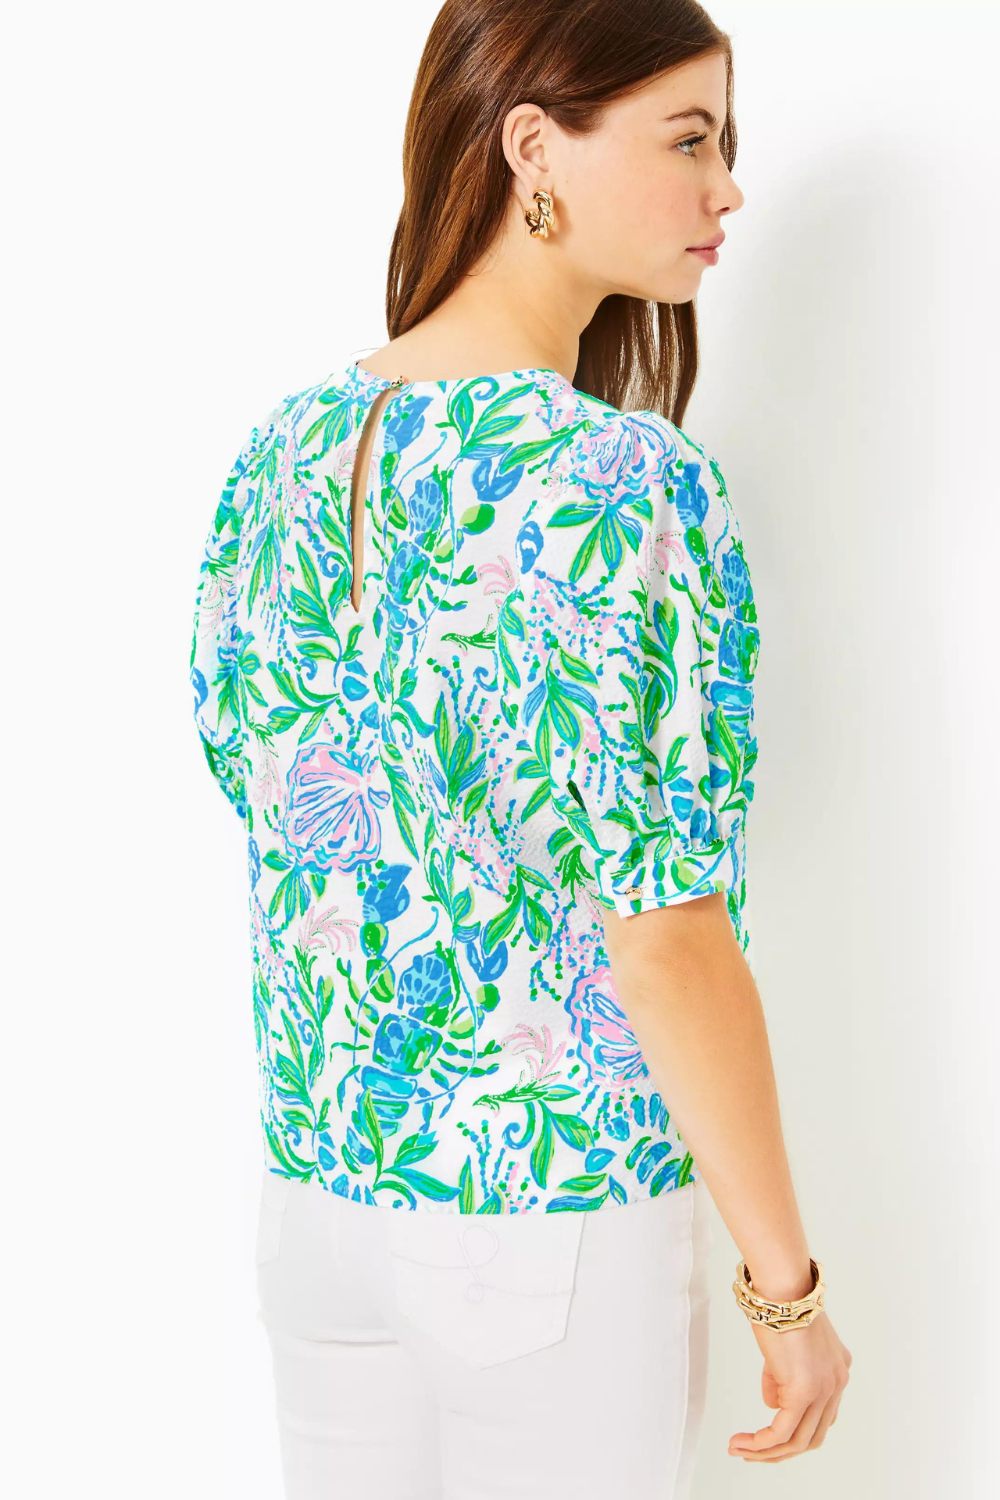 Lilly Pulitzer Masieleigh Short Sleeve Top - Just a Pinch